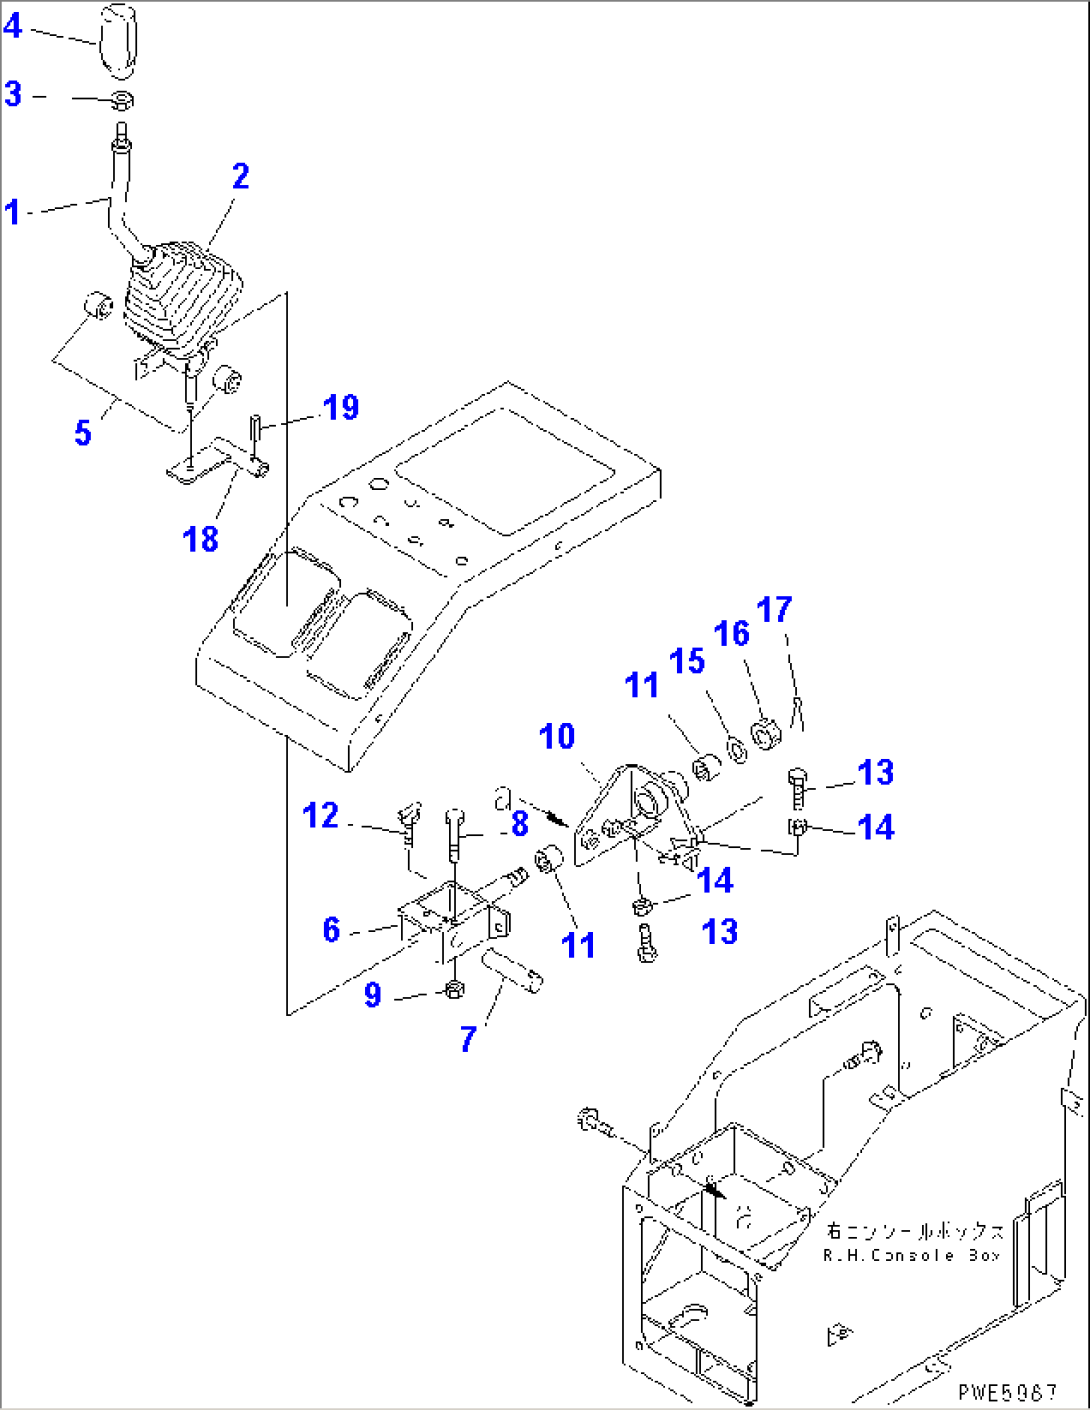 LOADER CONTROL (ATTACHEMENT CONTROL LEVER) (WITH 4-SPOOL OR 5-SPOOL CONTROL VALVE)